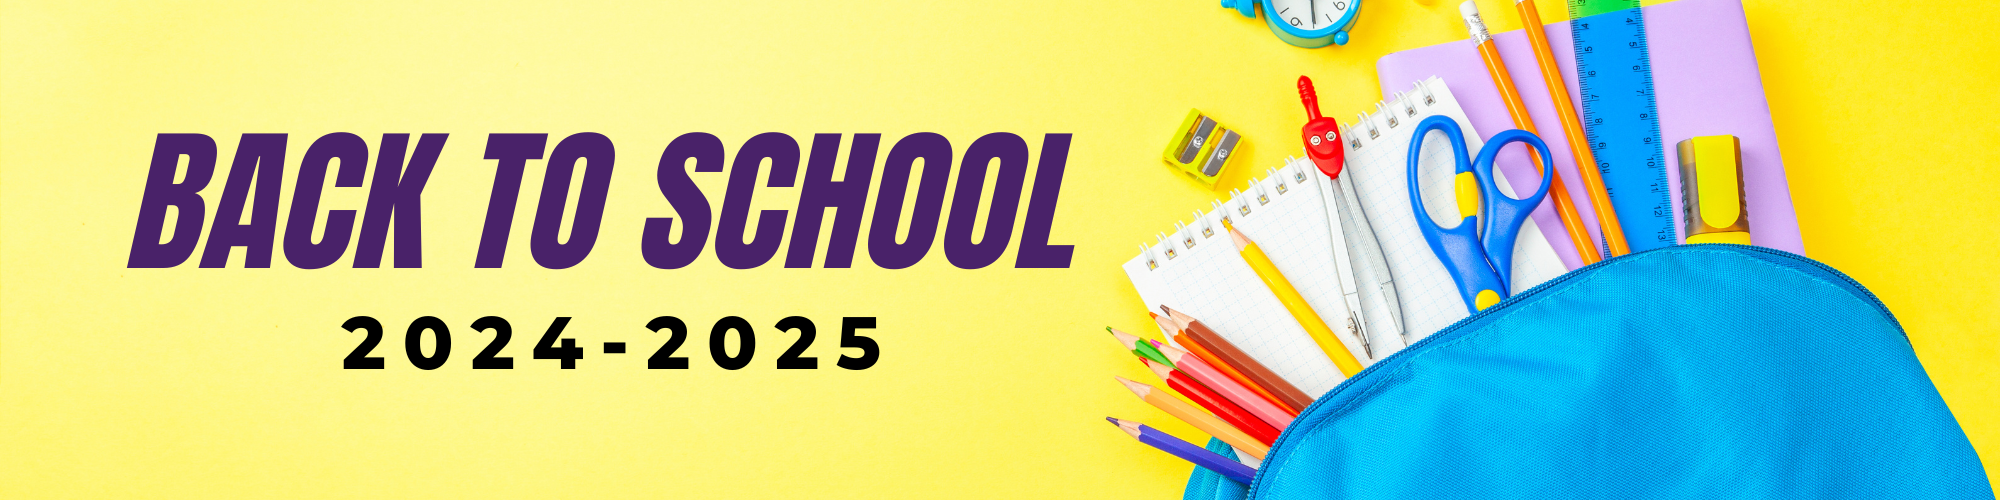 text: back to school 2024 to 2025 image: blue backpack filled with supplies on yellow background